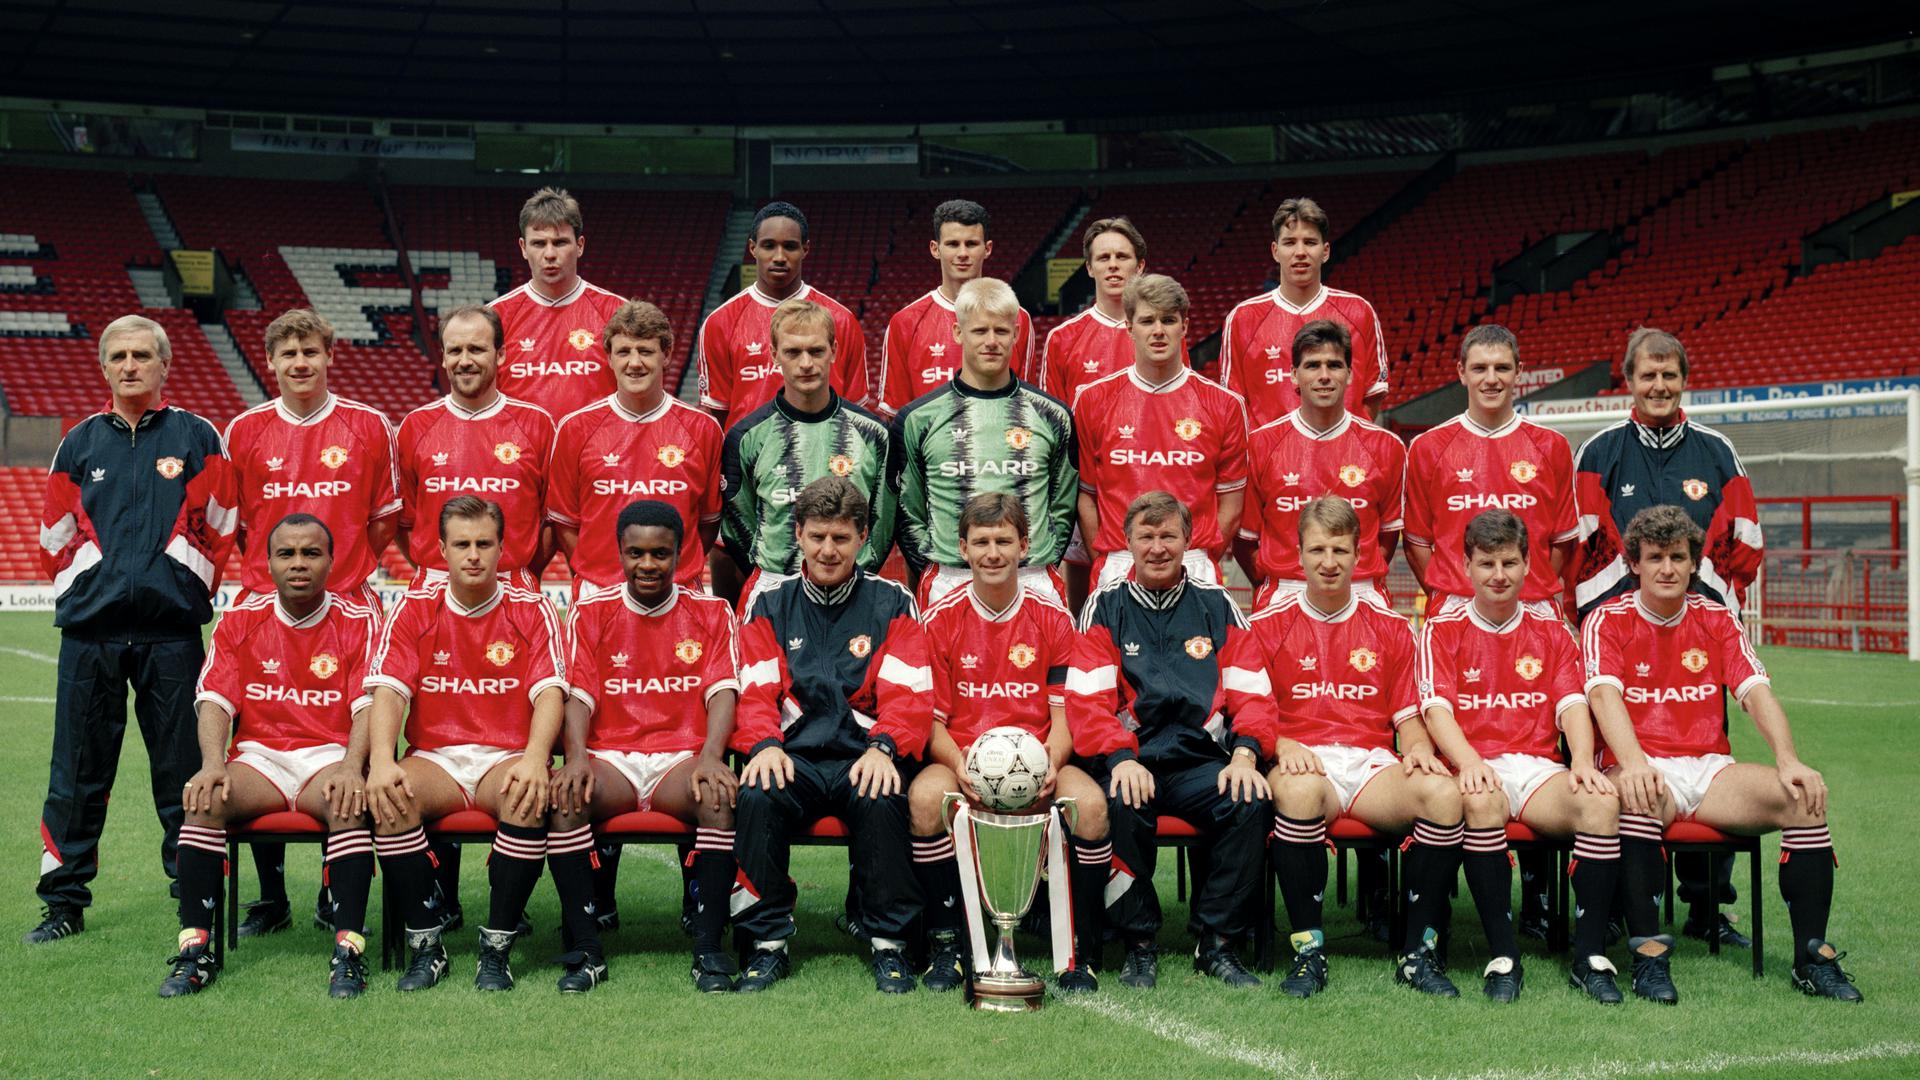 Classic squad photo from Man Utd's history